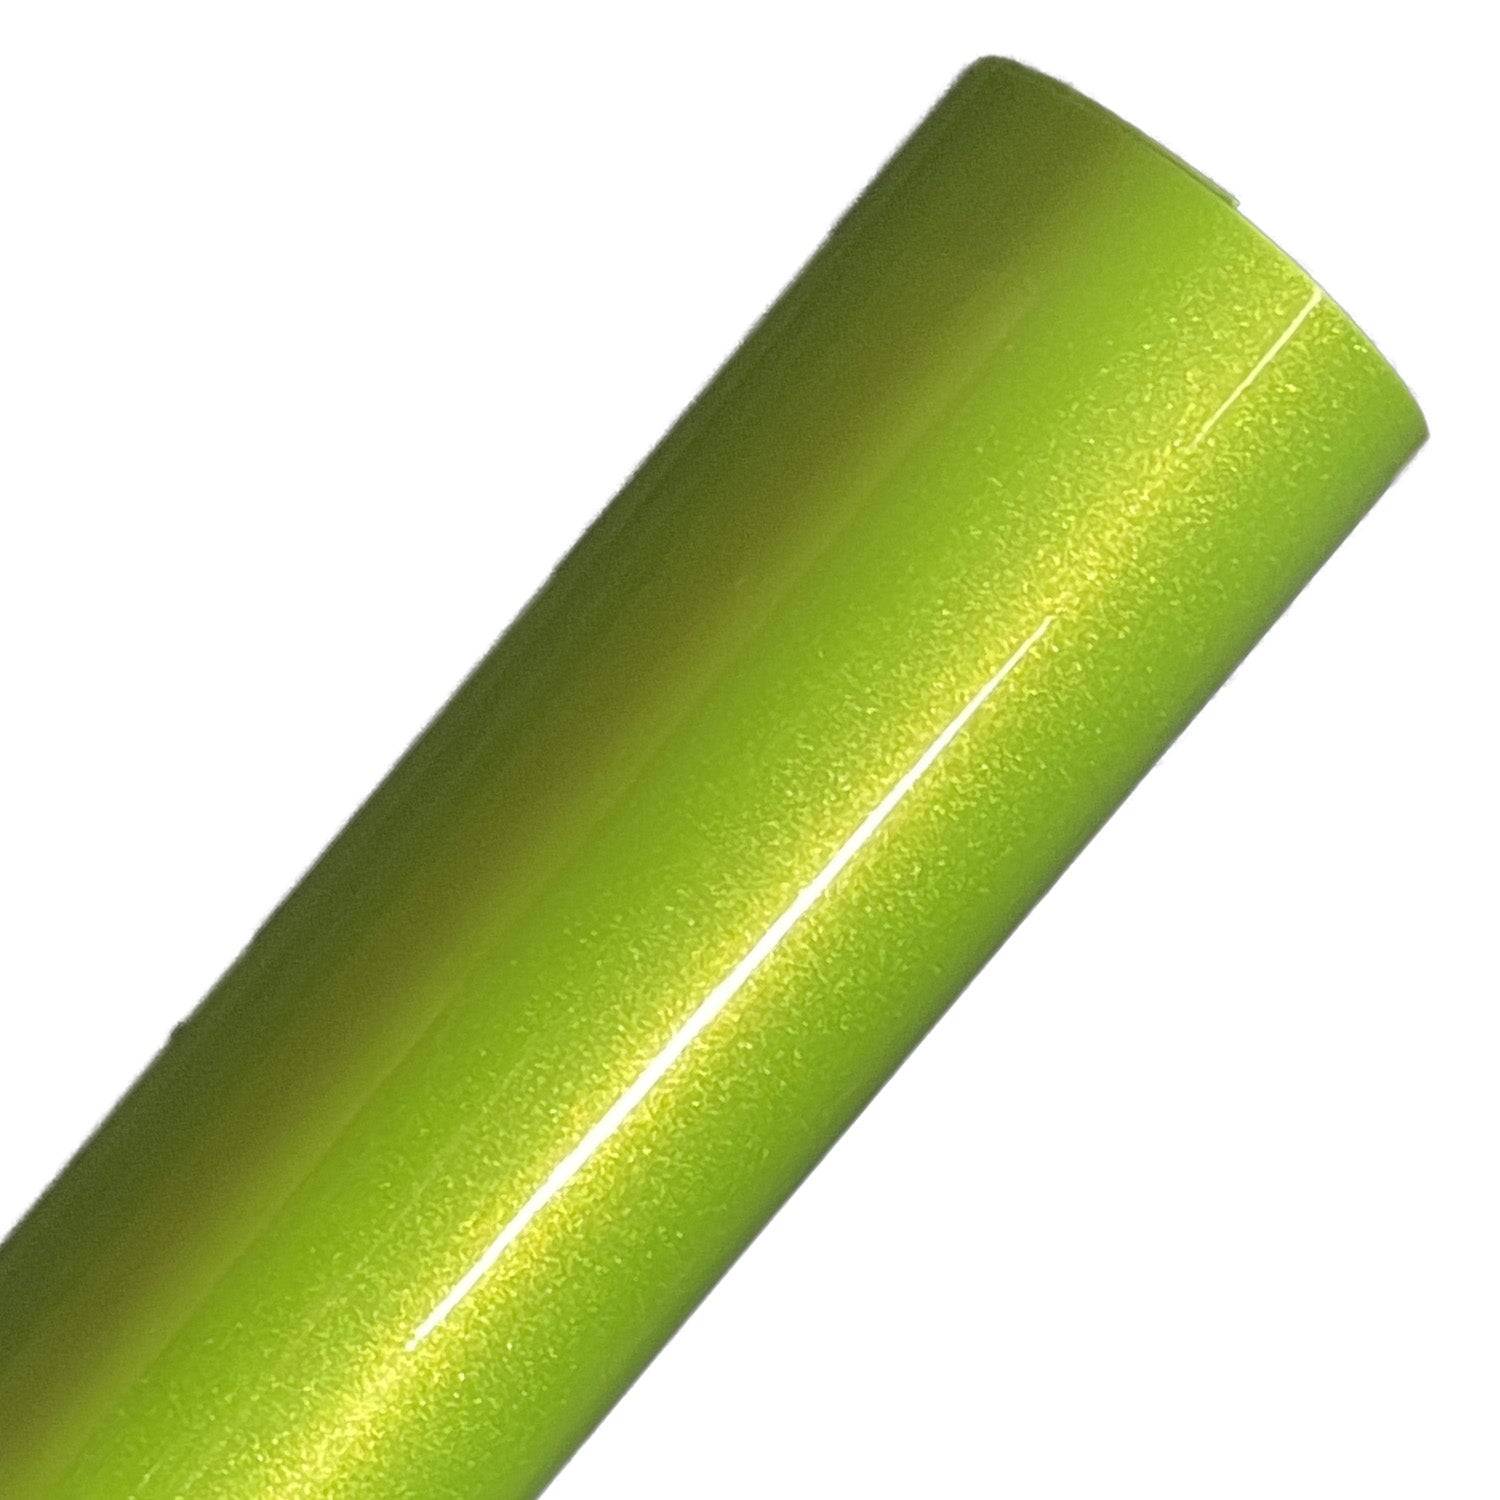 Green Holographic Adhesive Vinyl Rolls By Craftables